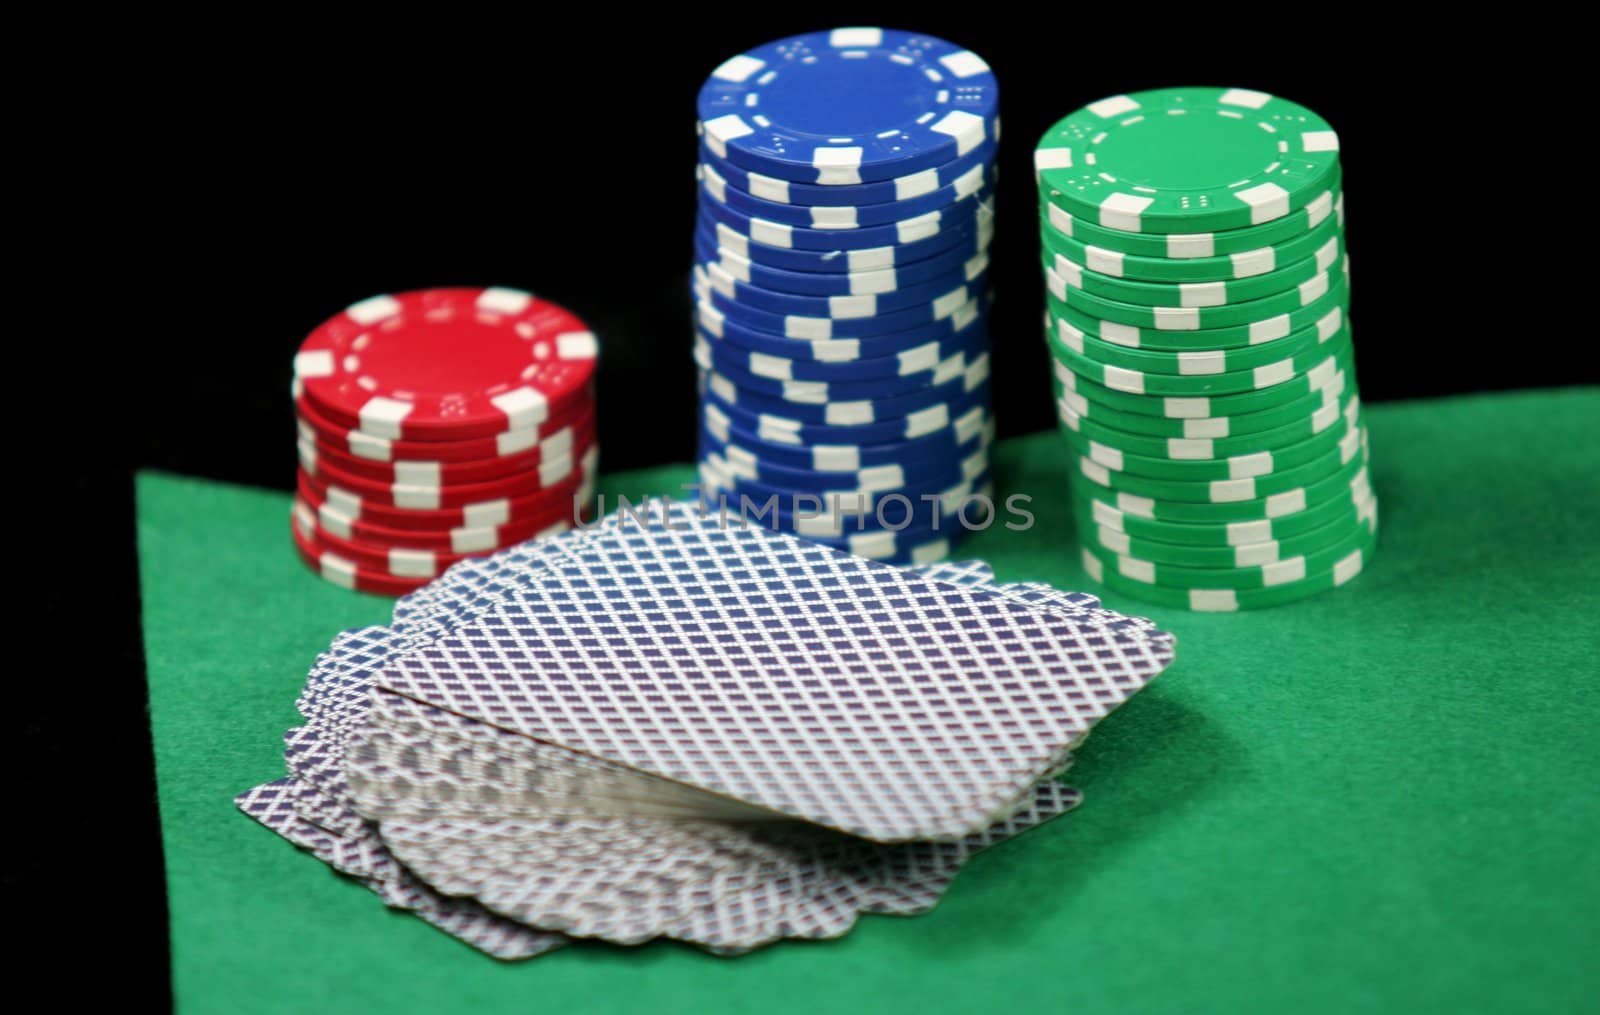 Poker and black jack, with isolated gaming objects, towards green